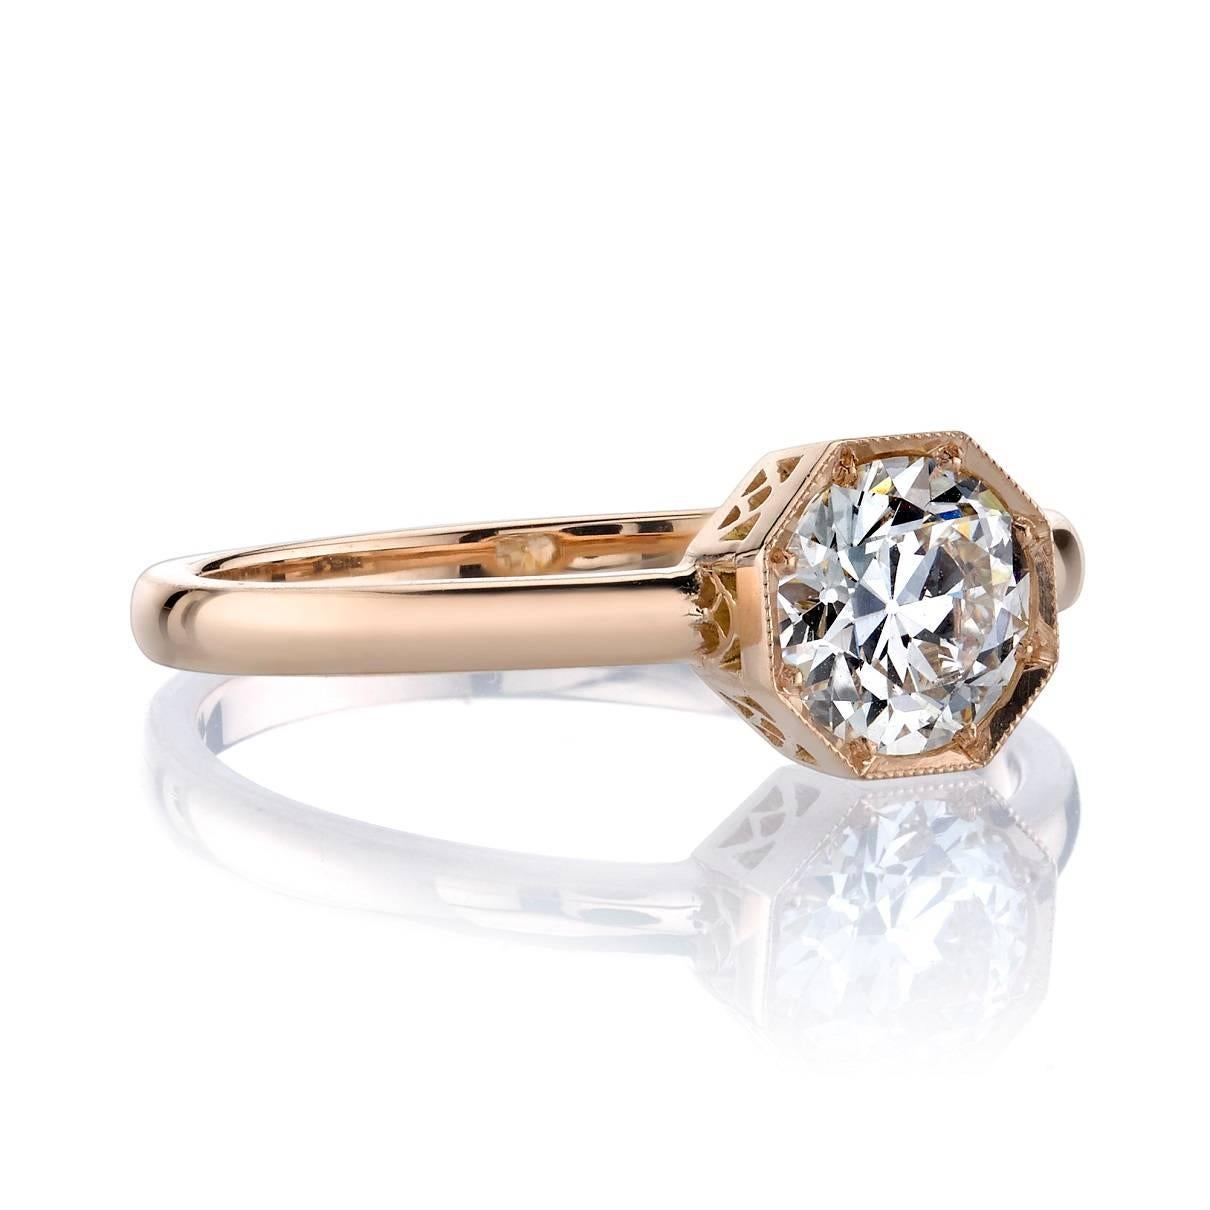 0.72ct J/VS1 old European cut diamond GIA certified and set in a handcrafted 18k rose gold mounting.  A classic Art Deco inspired design featuring an octagonal frame.